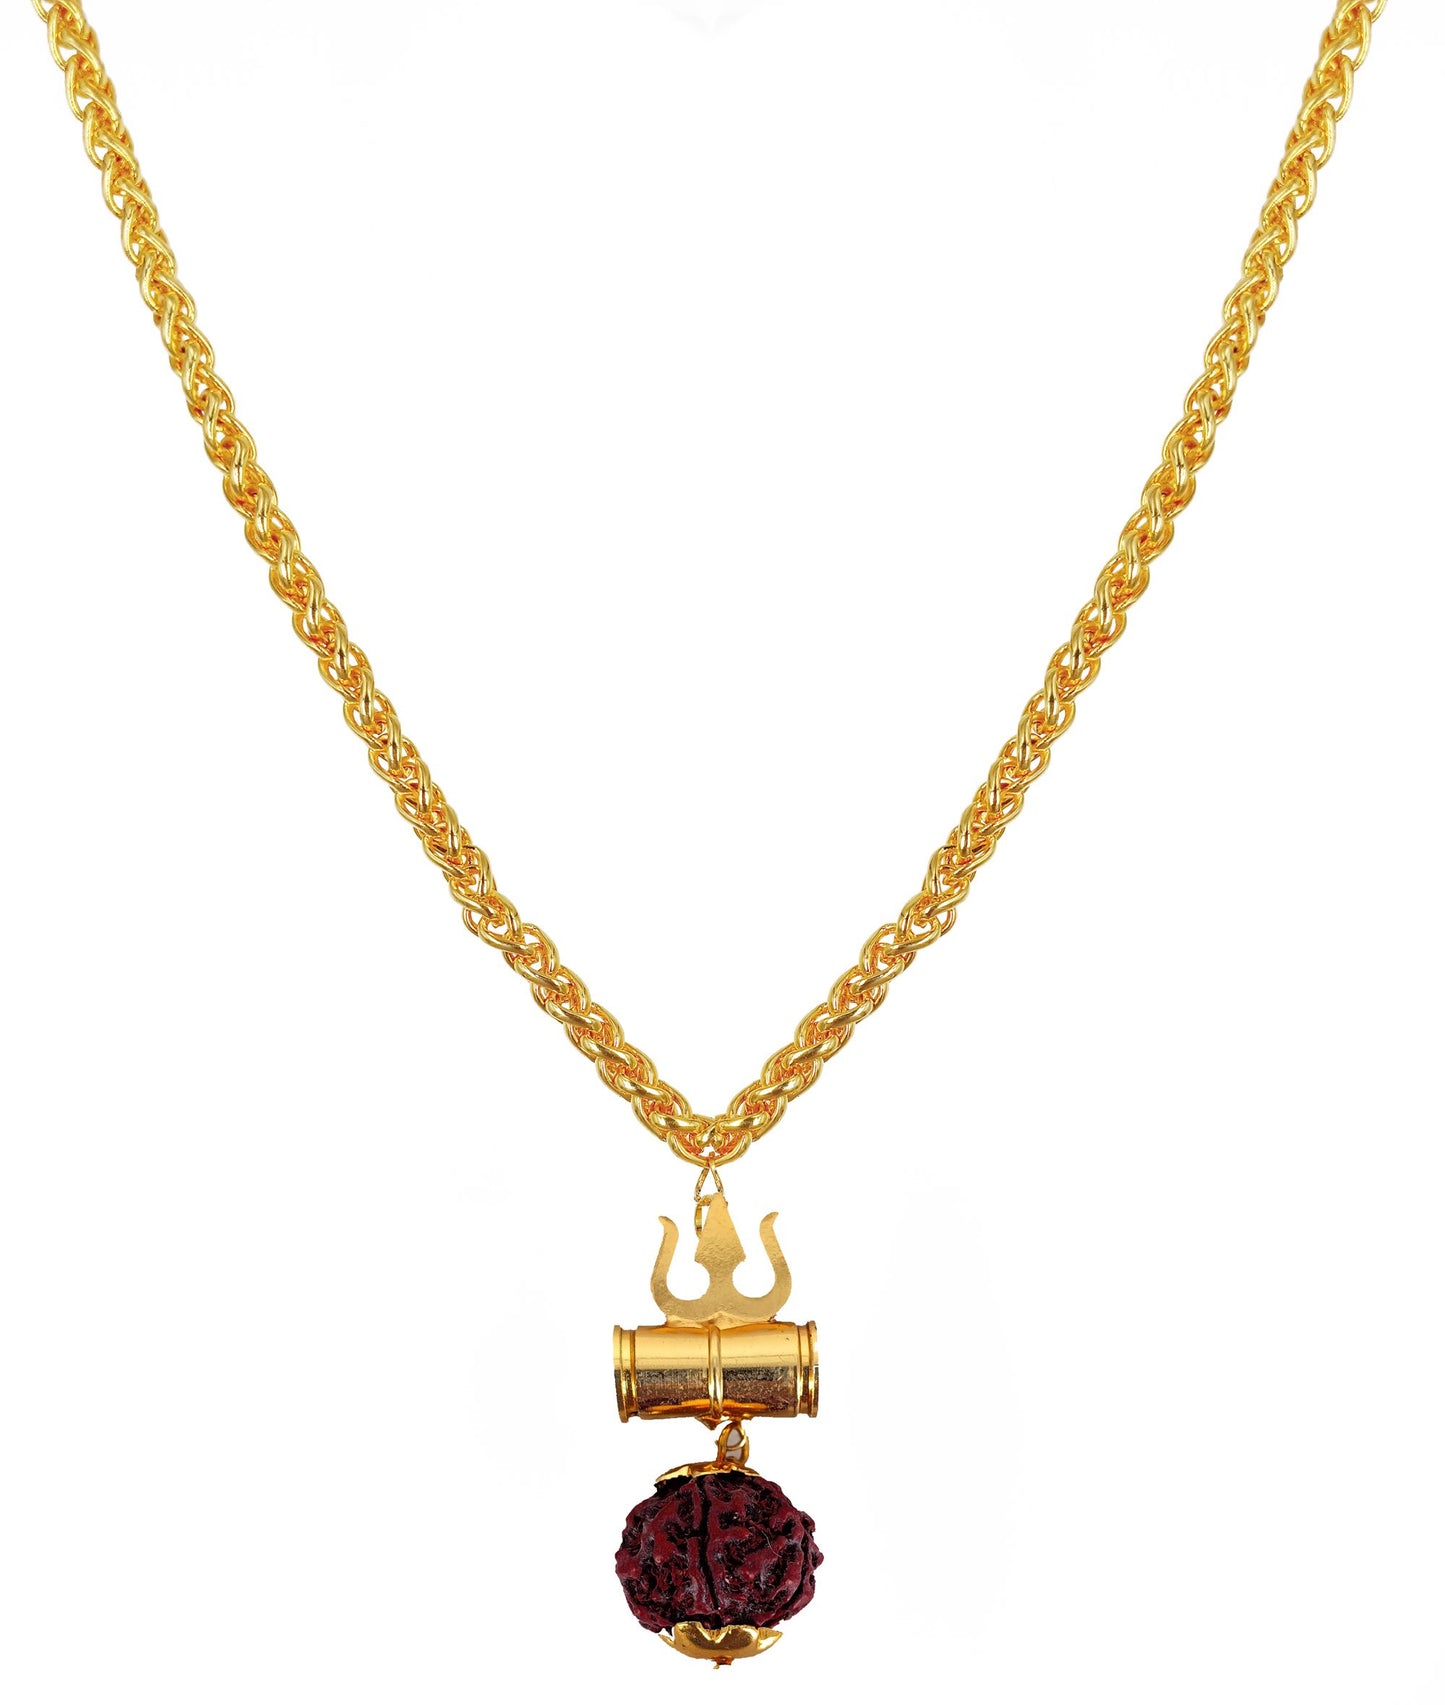 DS Luxurious Men's Gold Plated Pendant With Chain Vol 2